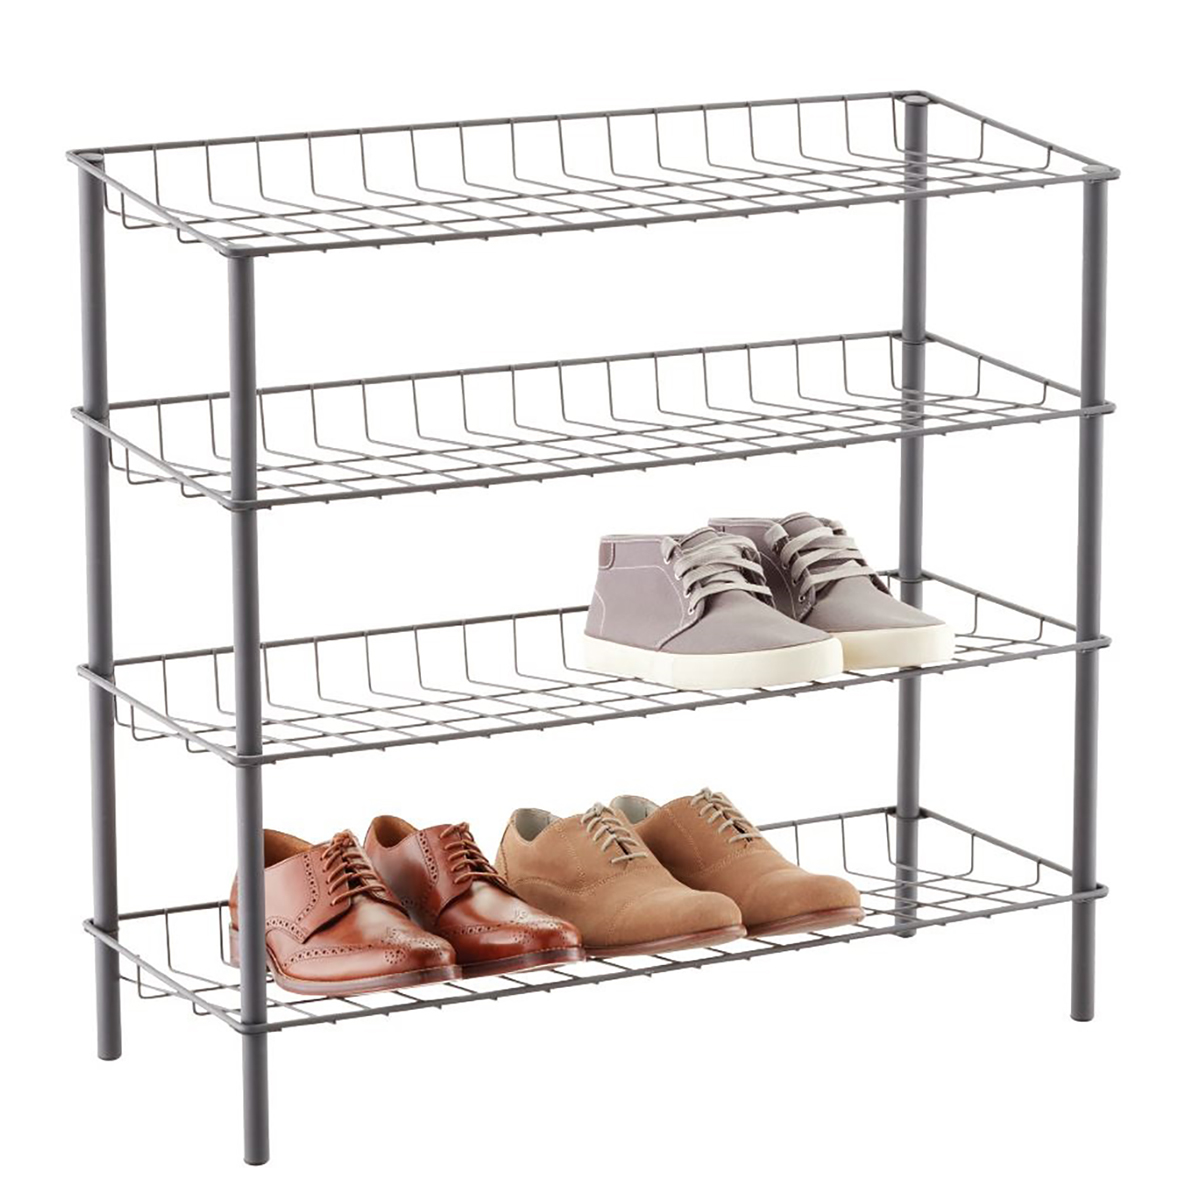 Graphite 4-Tier Metal Shoe Rack | The Container Store